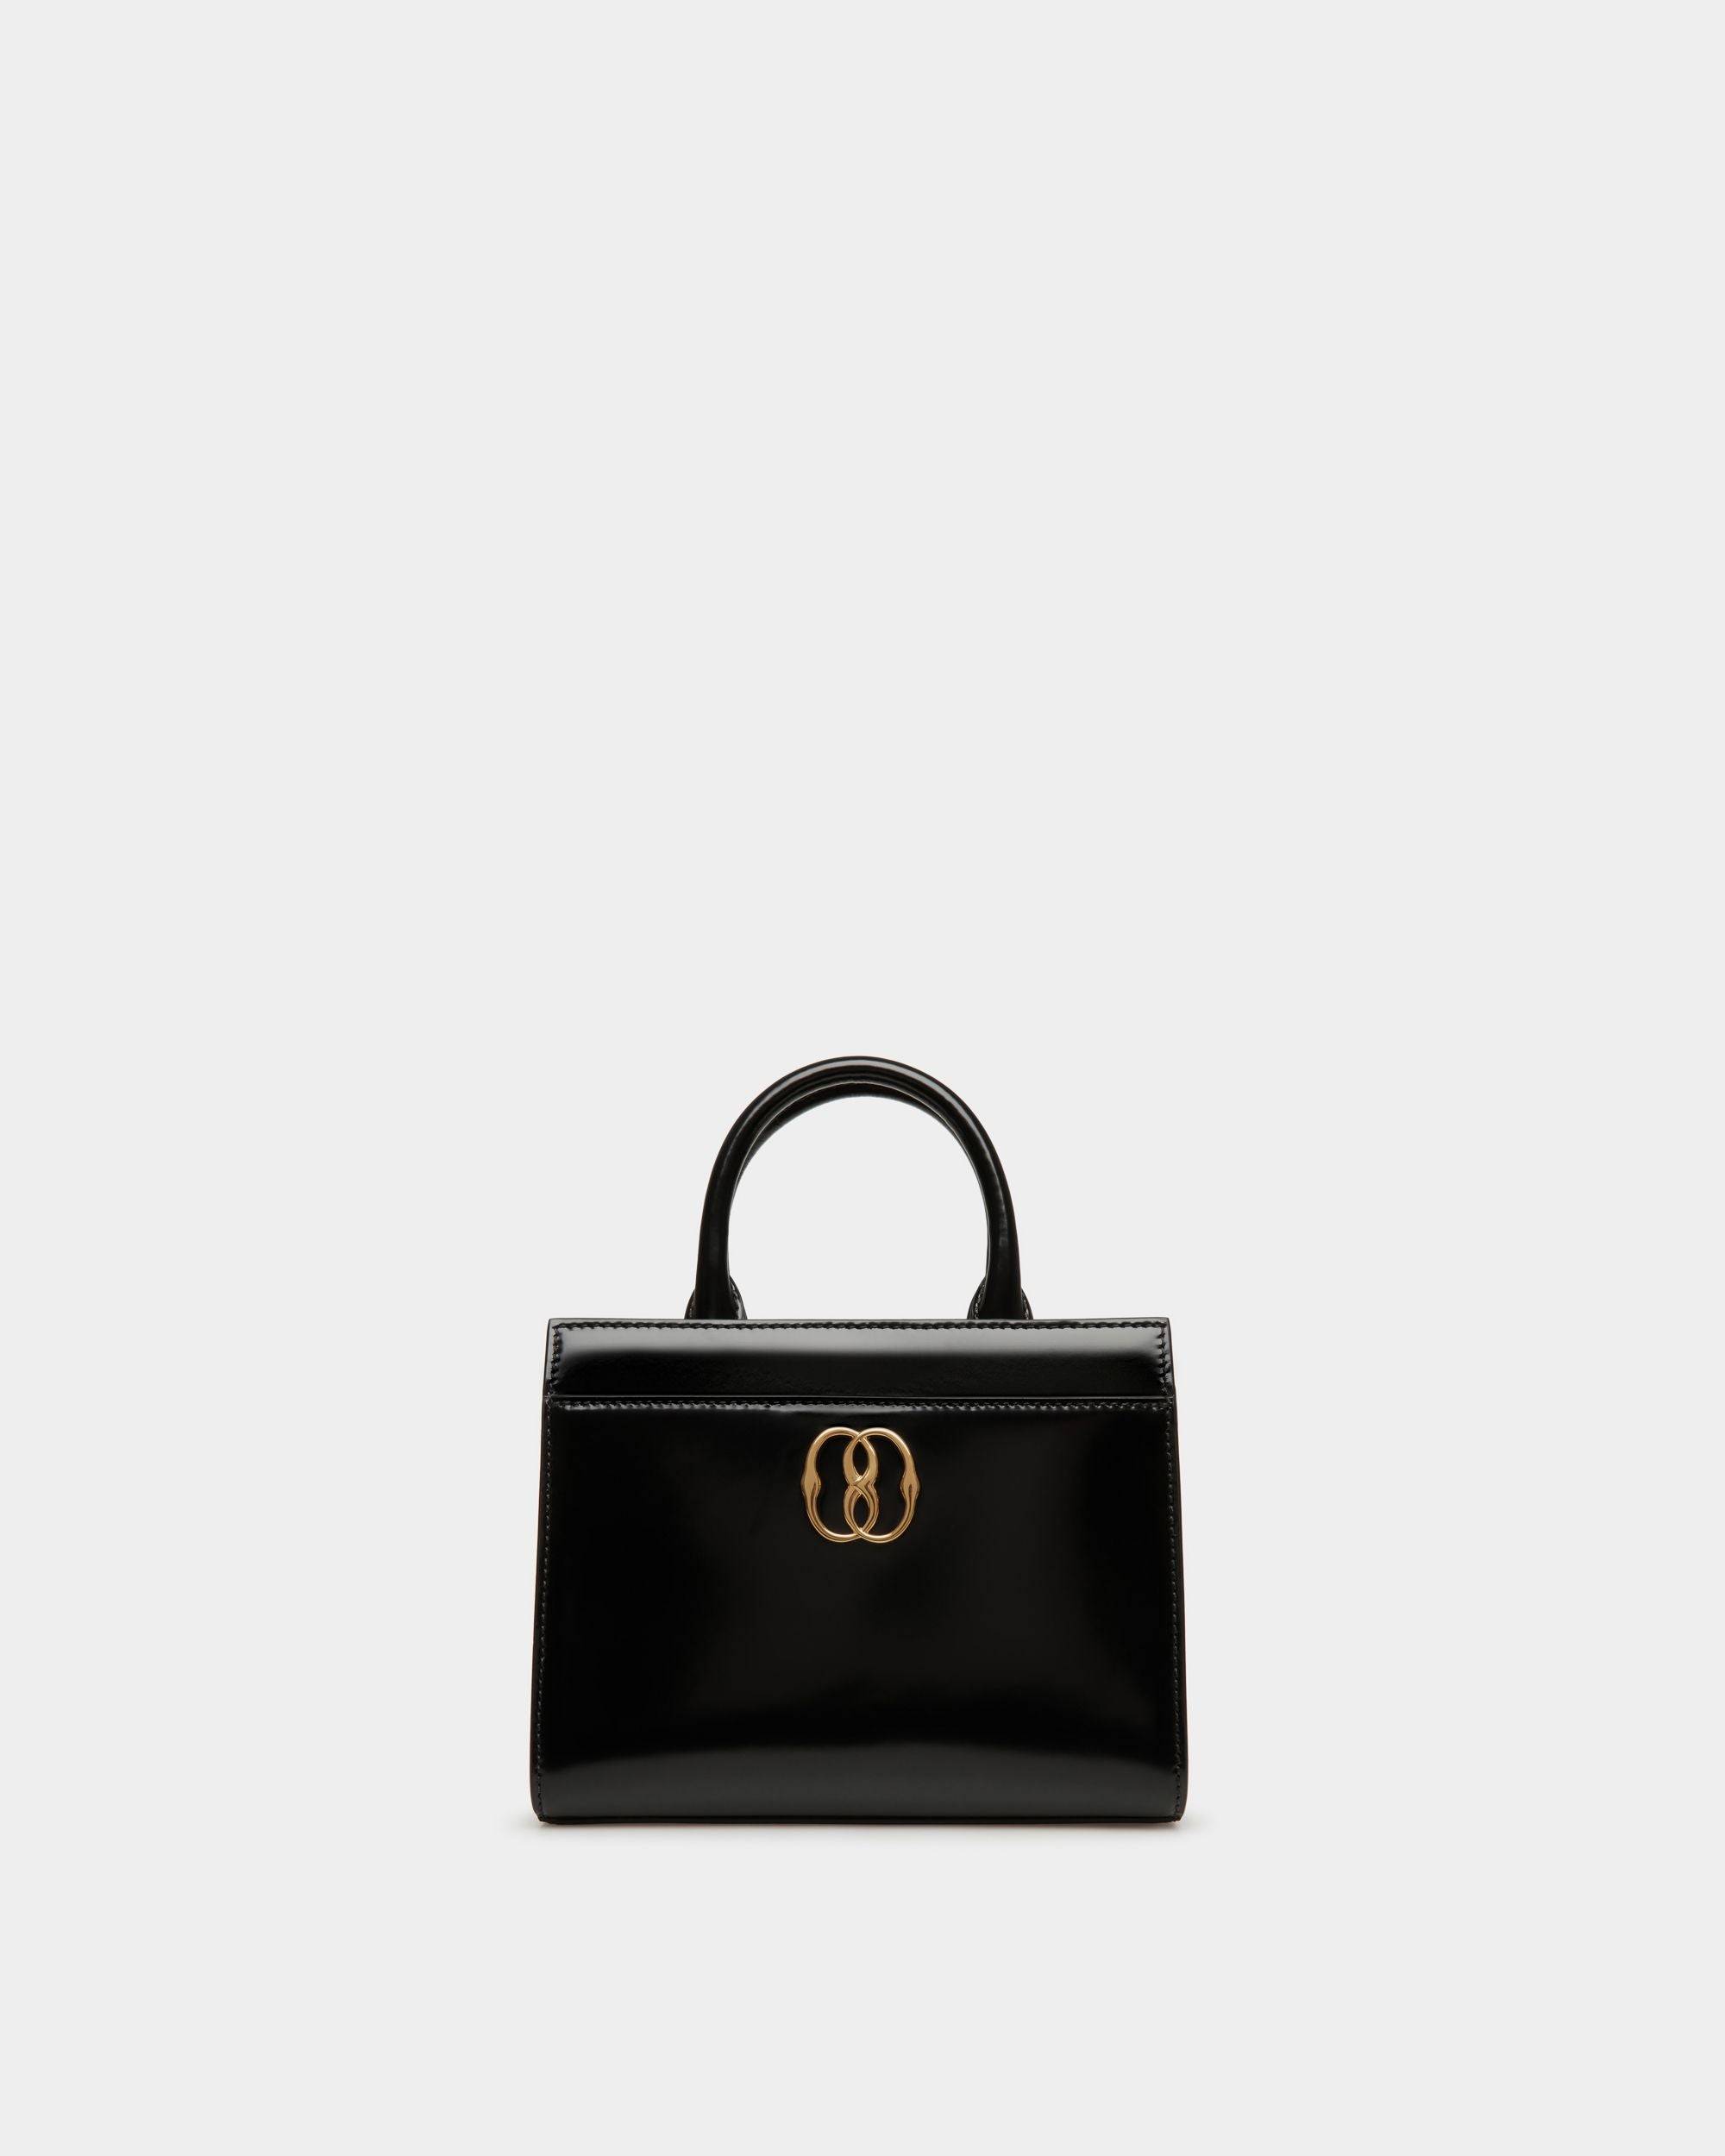 Women's Emblem Small Tote Bag In Black Patent Leather | Bally | Still Life Front